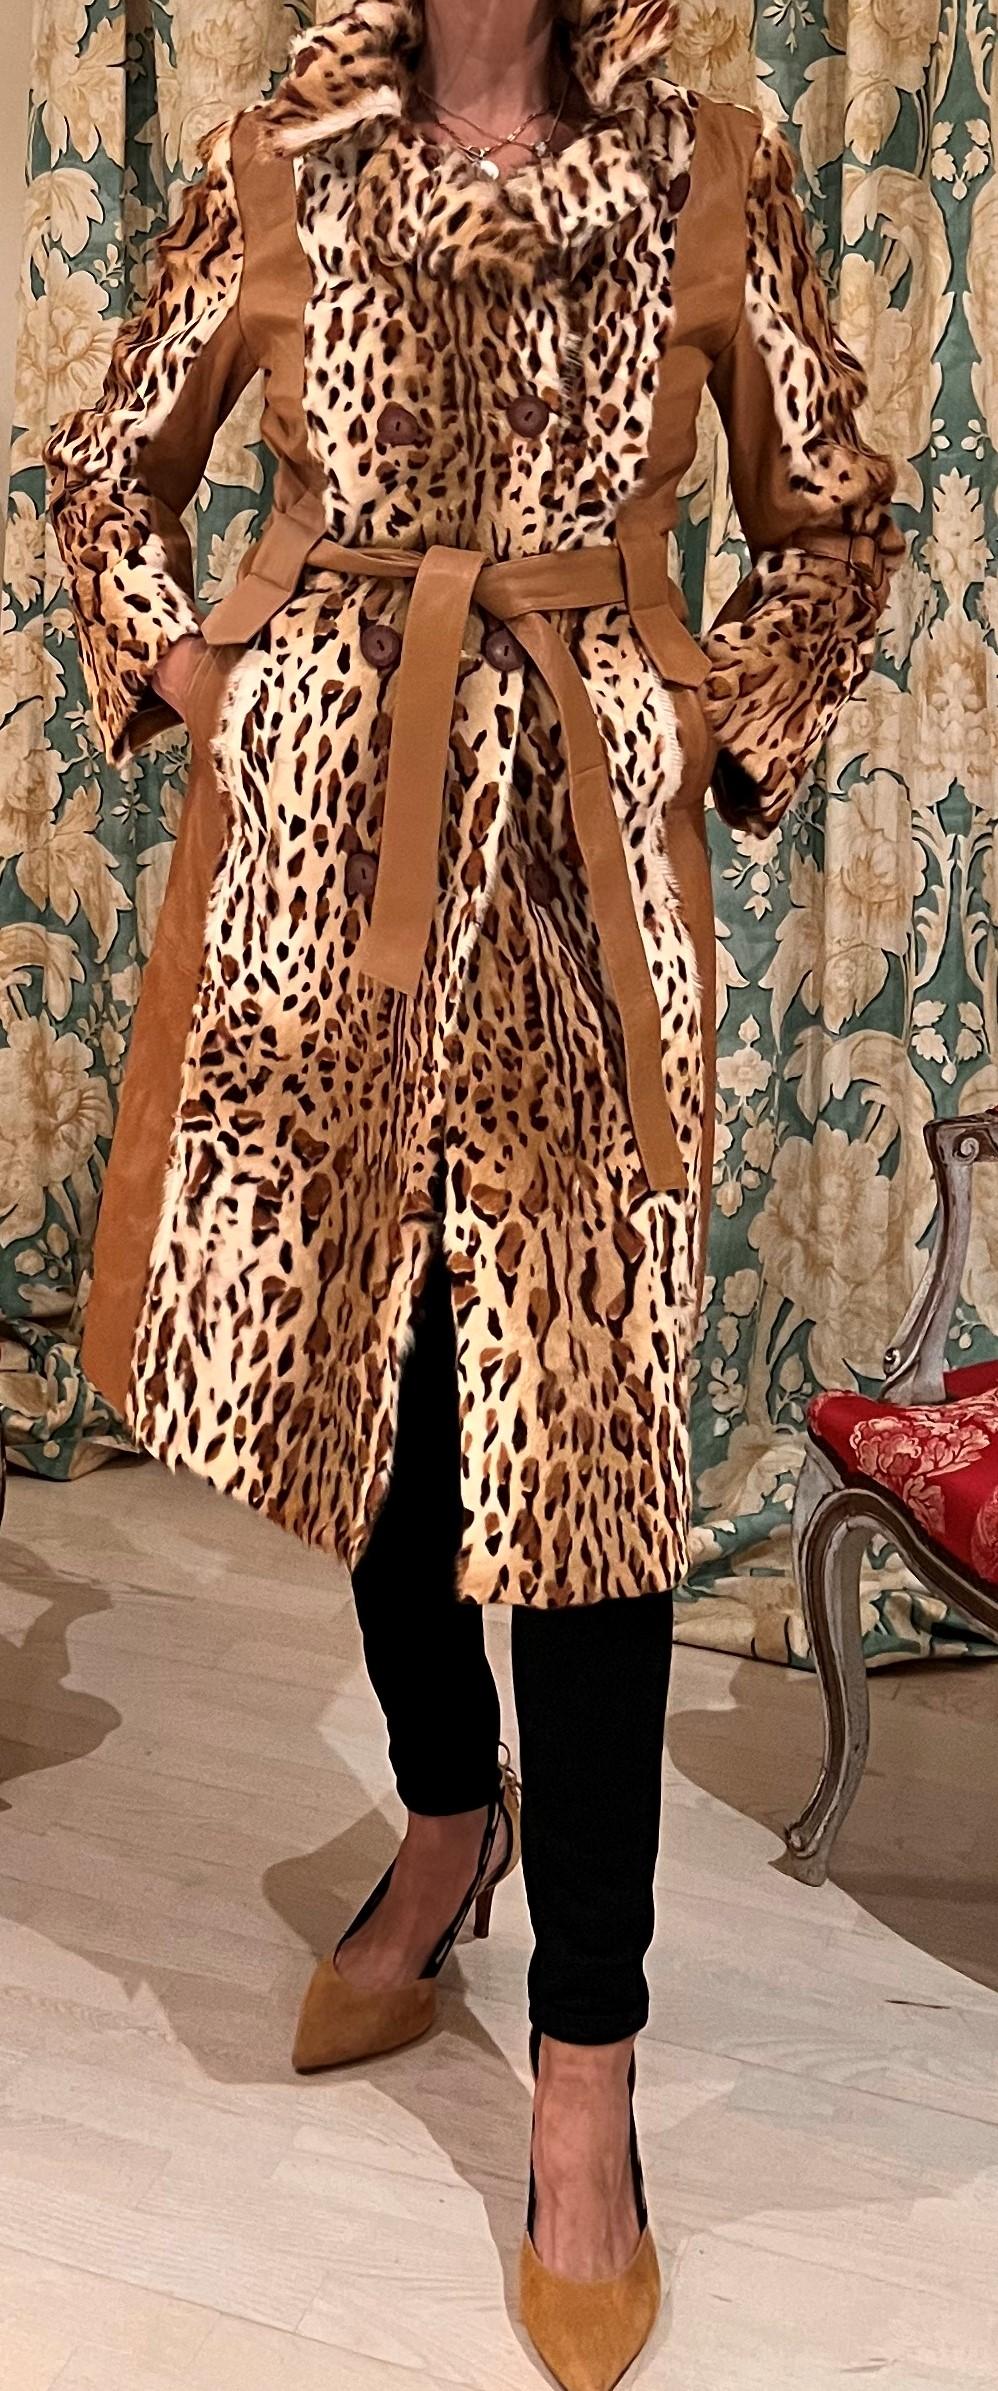 Long Leopard and brown Leather Coat Fur (Outer), 100% Silk (Lining)
Rain Coat Style
The coat has 2 pockets and belt and four buttons 
Size: 40- 42 Europe - 8- 10 US 
2 Large pockets with a small slot pocket inside.
Simplicity at its timeless